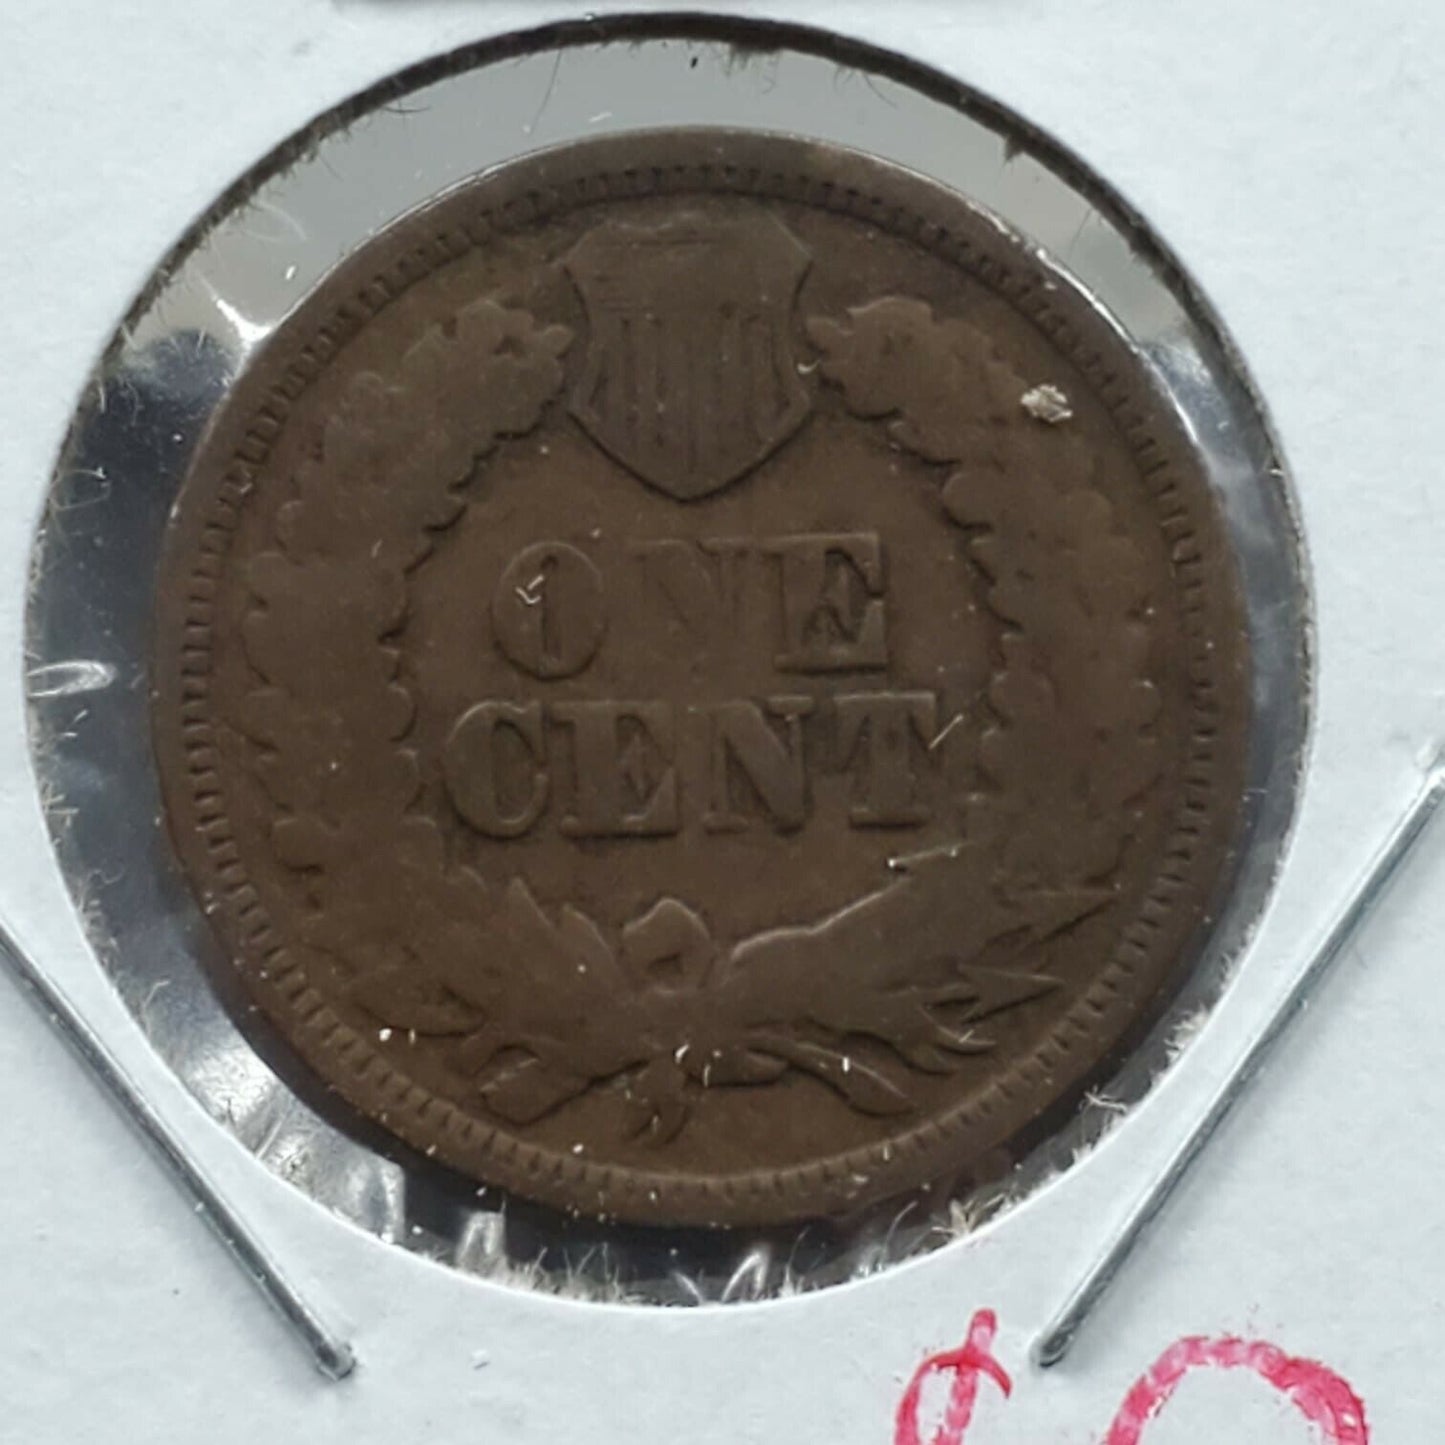 1870 Indian Head Cent Coin Reverse of 1869 FS-901 Variety VG Very Good Circulate